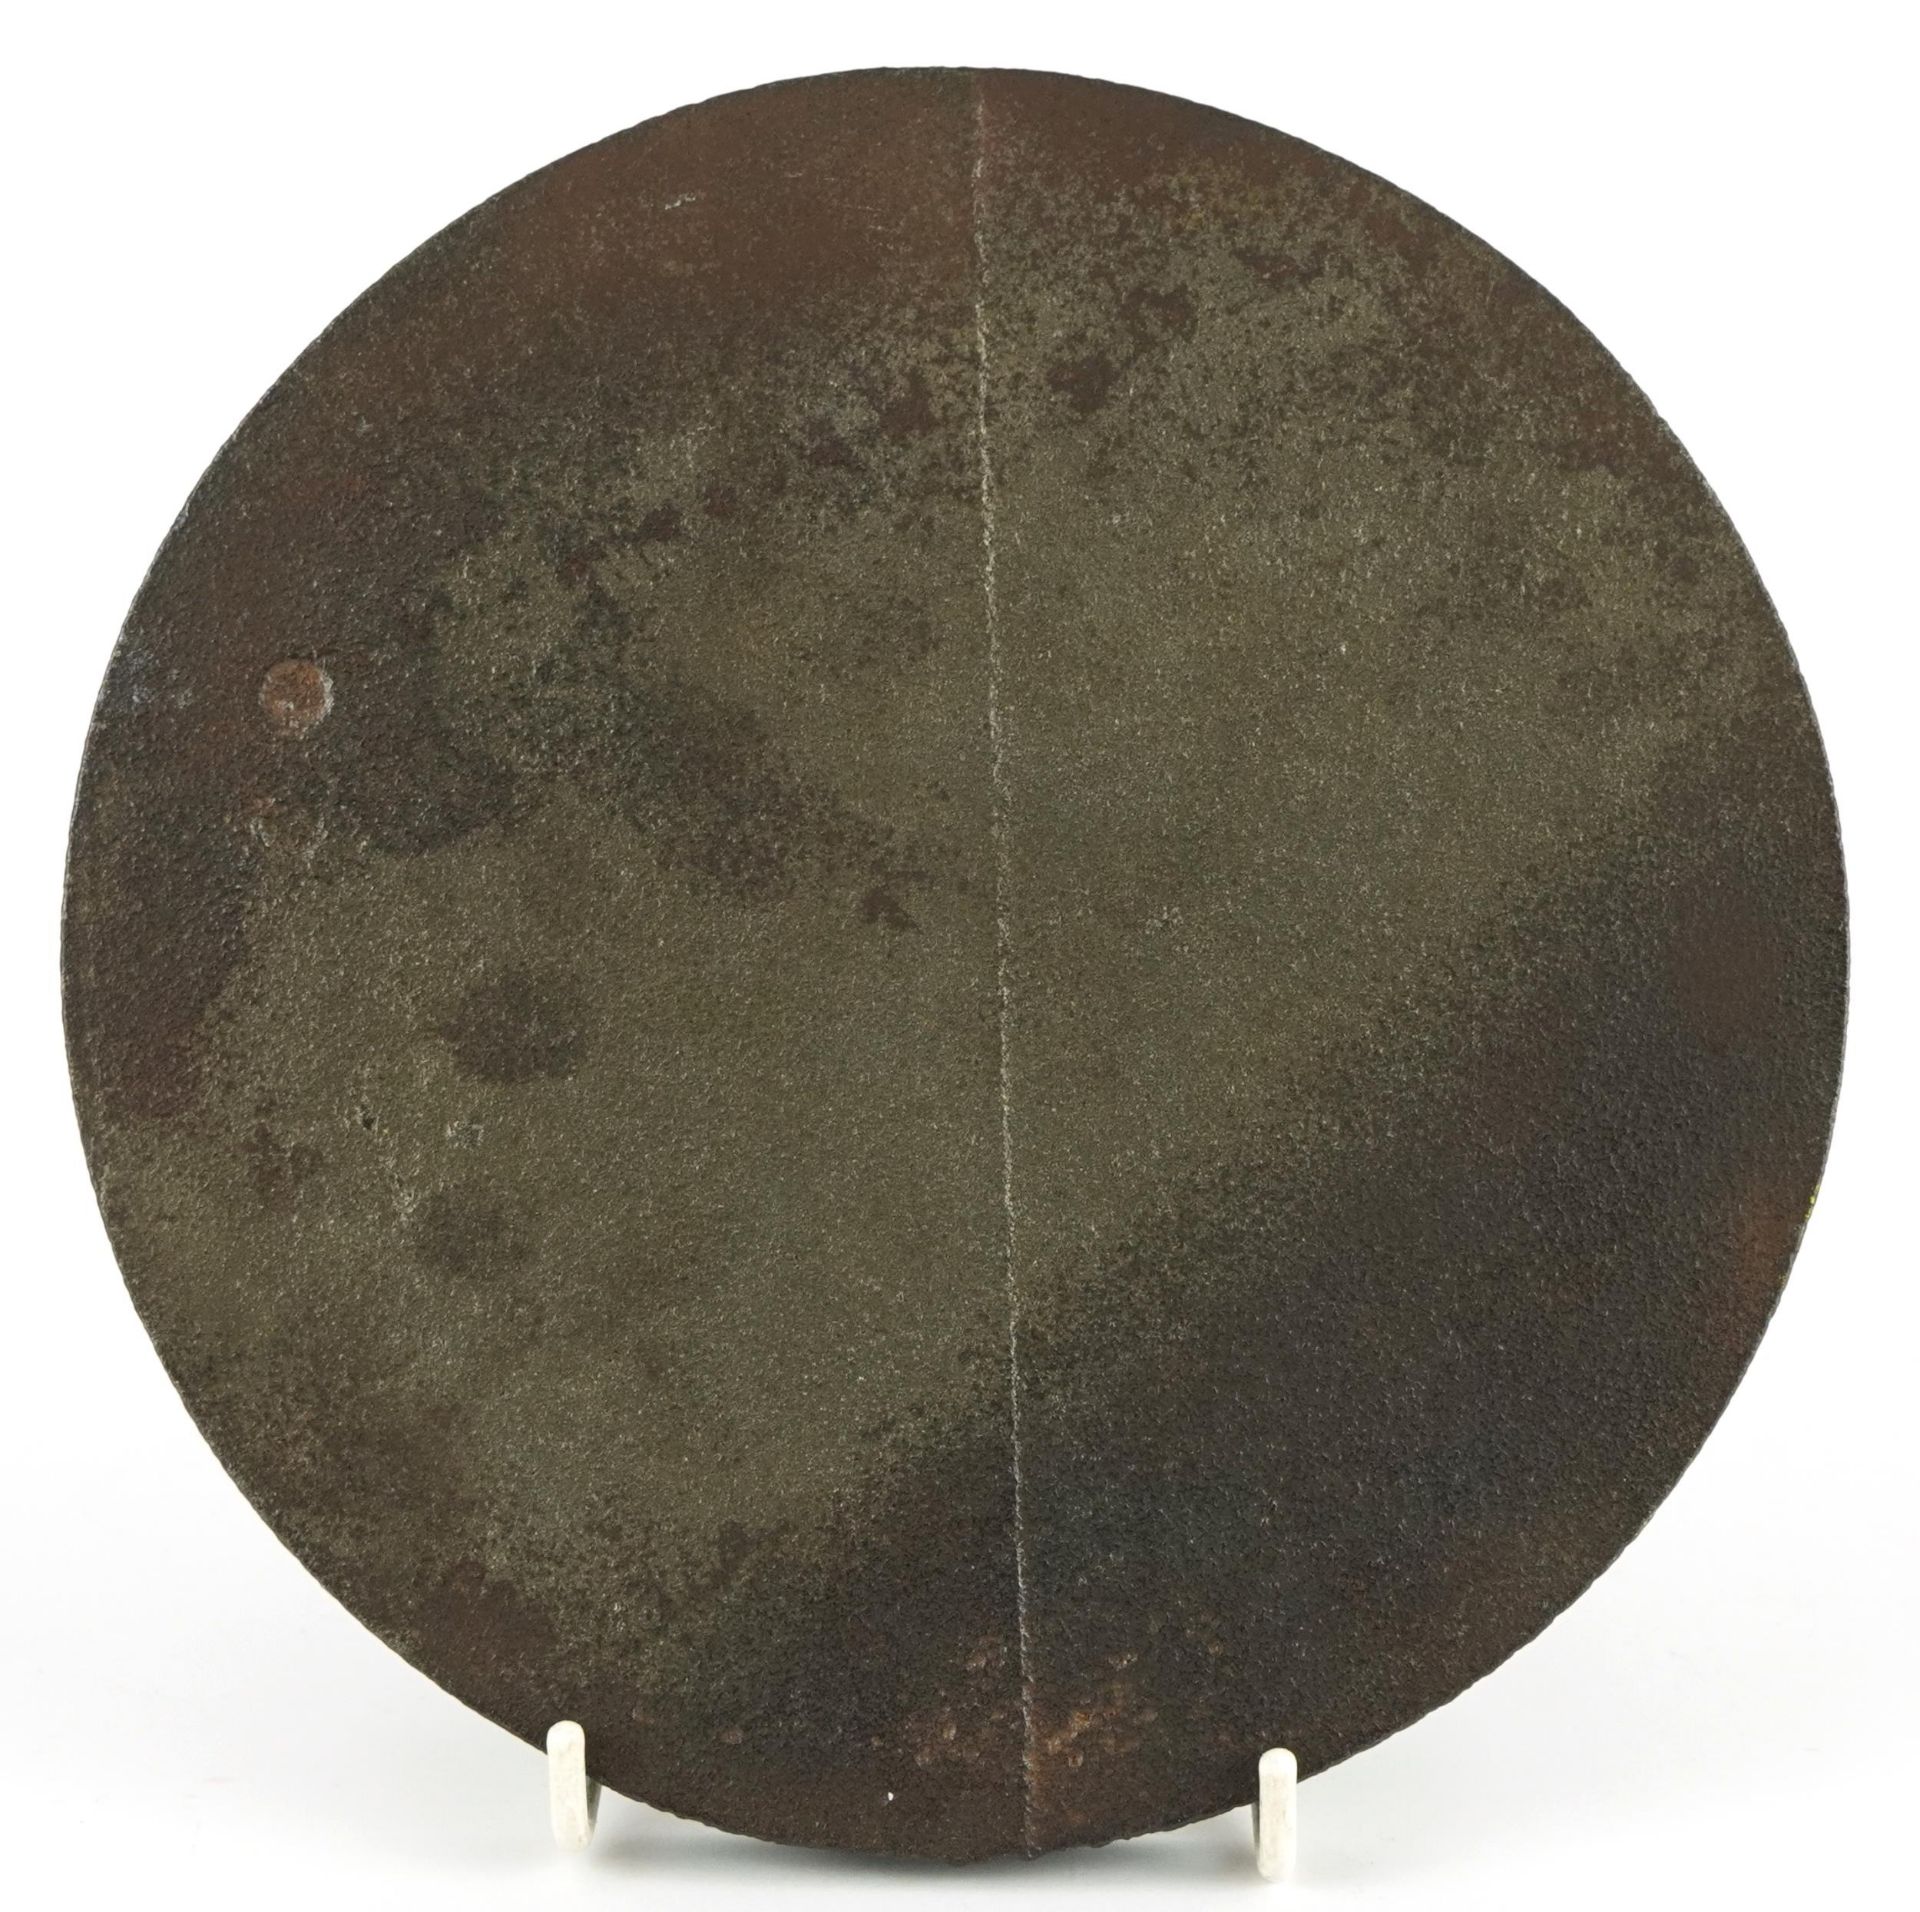 Automobilia interest Ford Thames Foundary cast iron plaque, 19cm in diameter : For further - Image 2 of 2